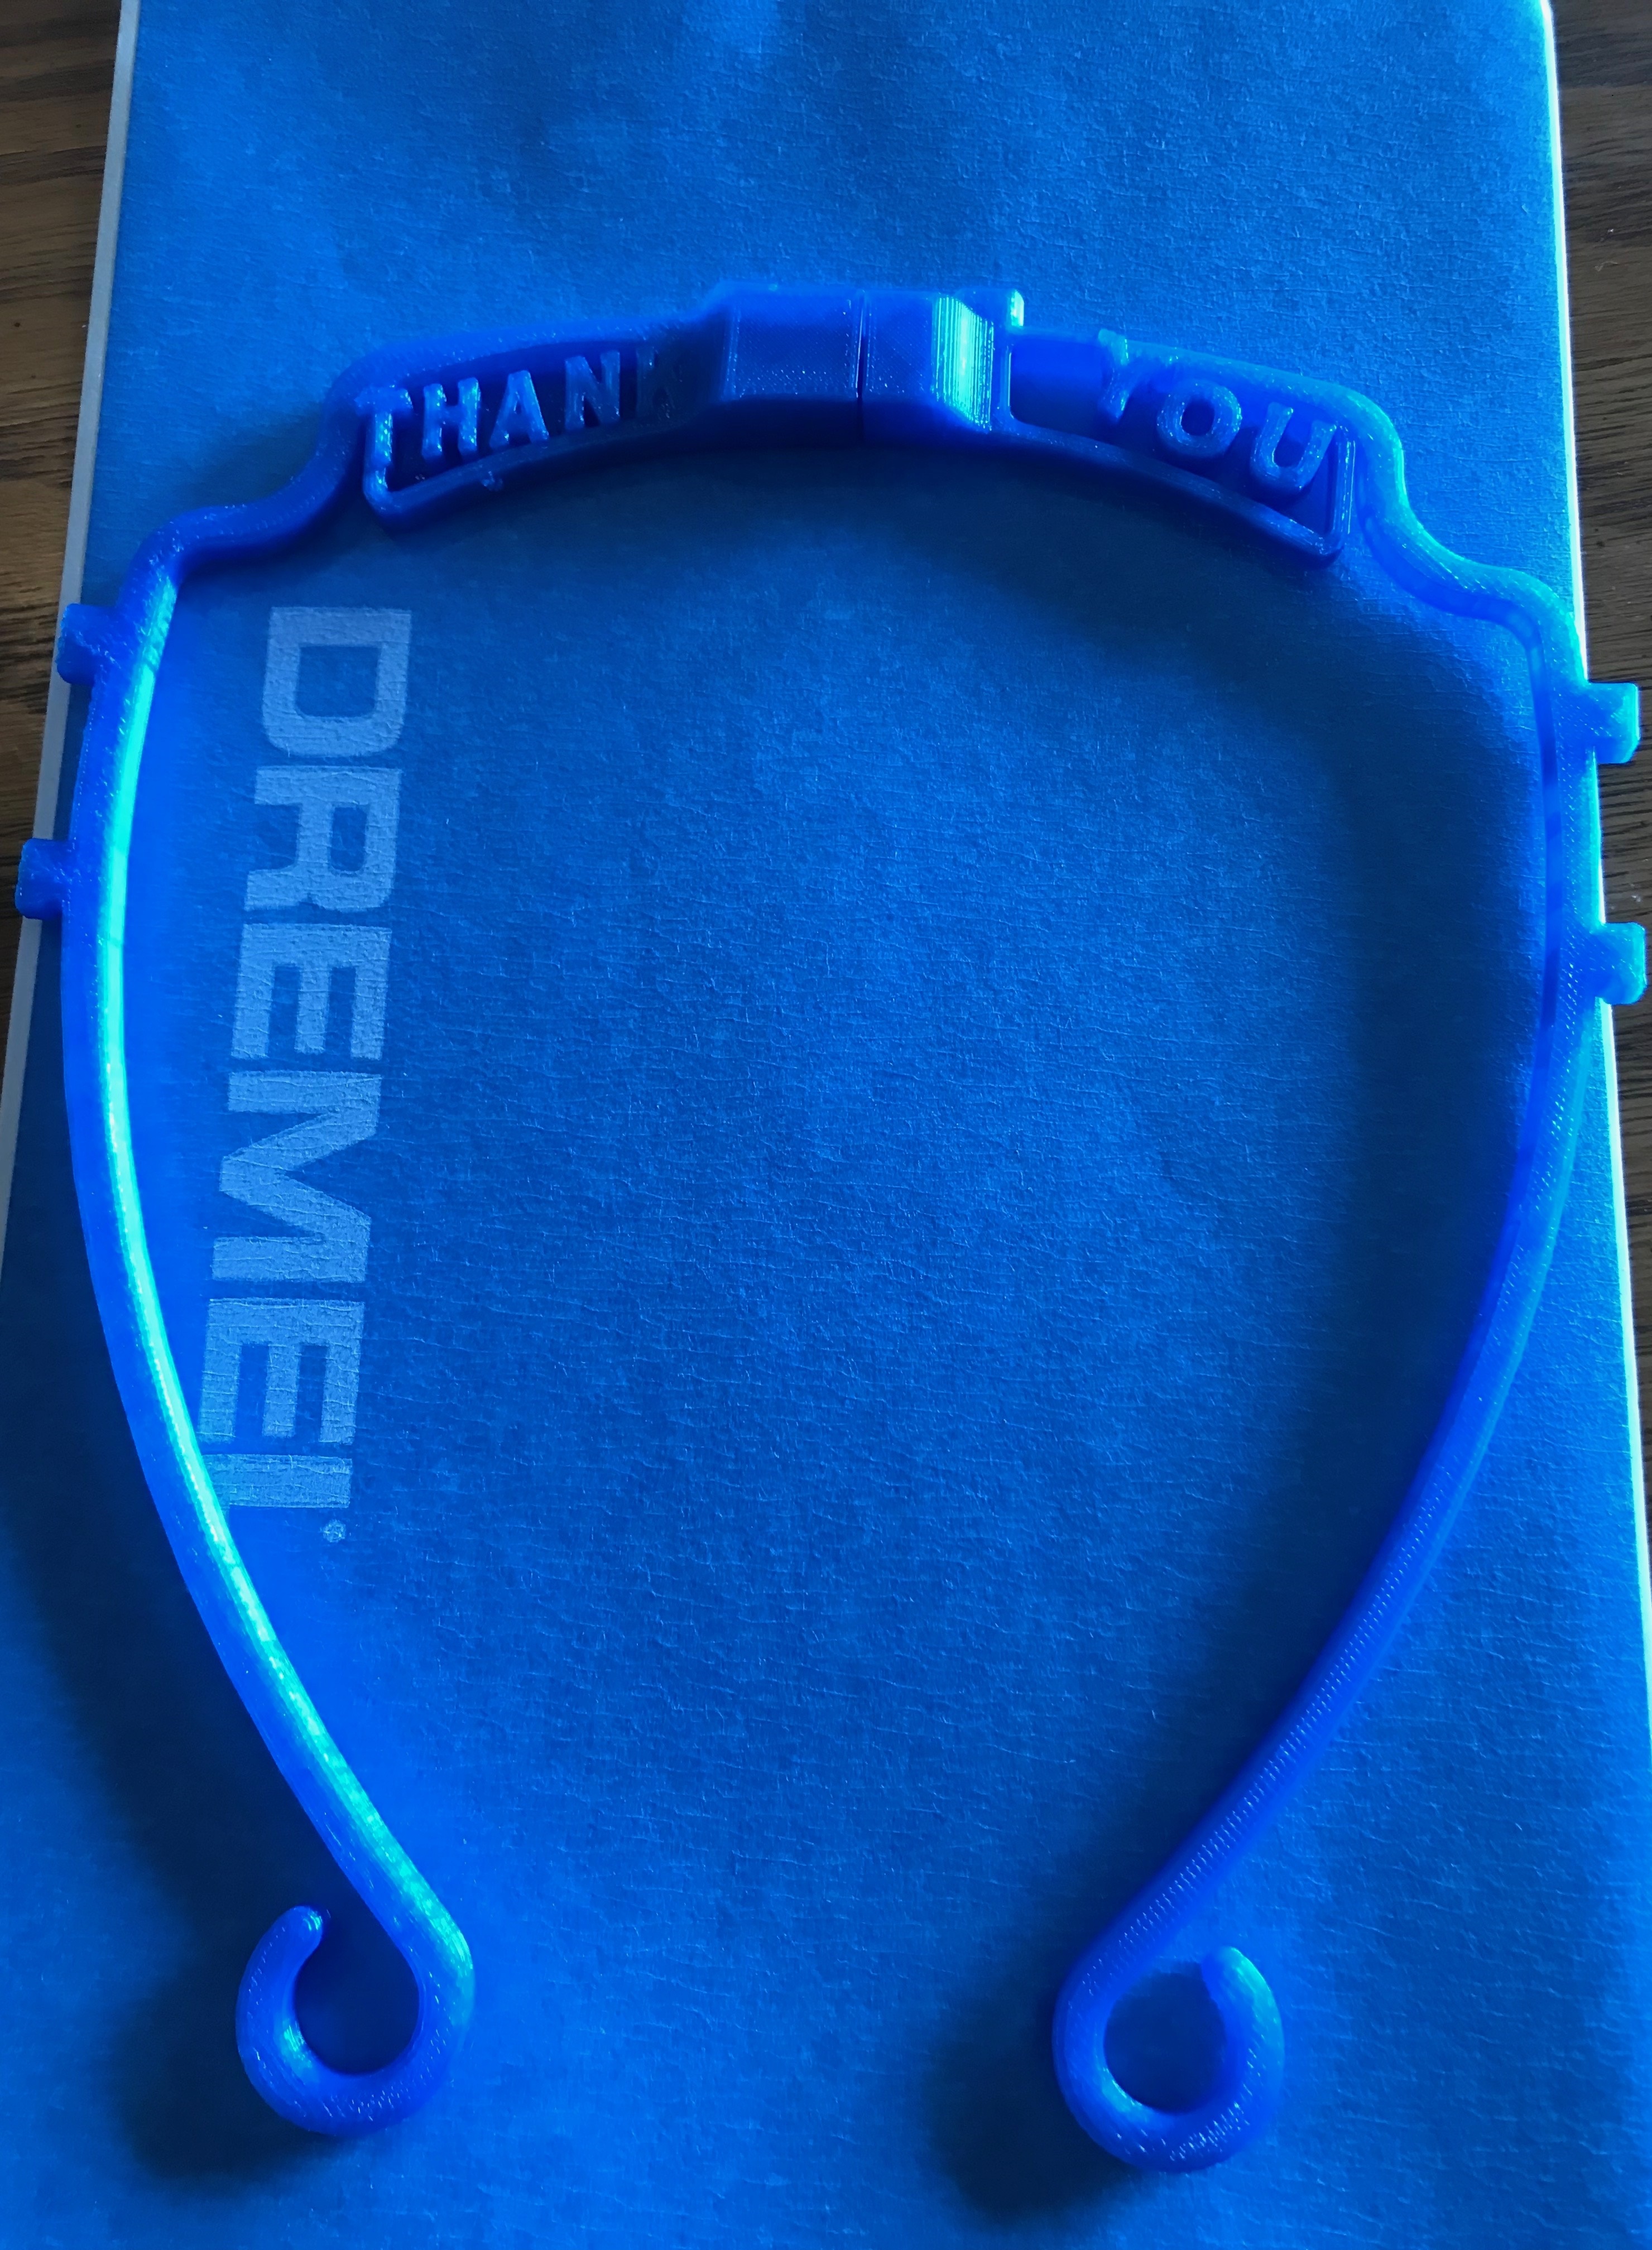 A 3D printed face mask frame with a personalized message